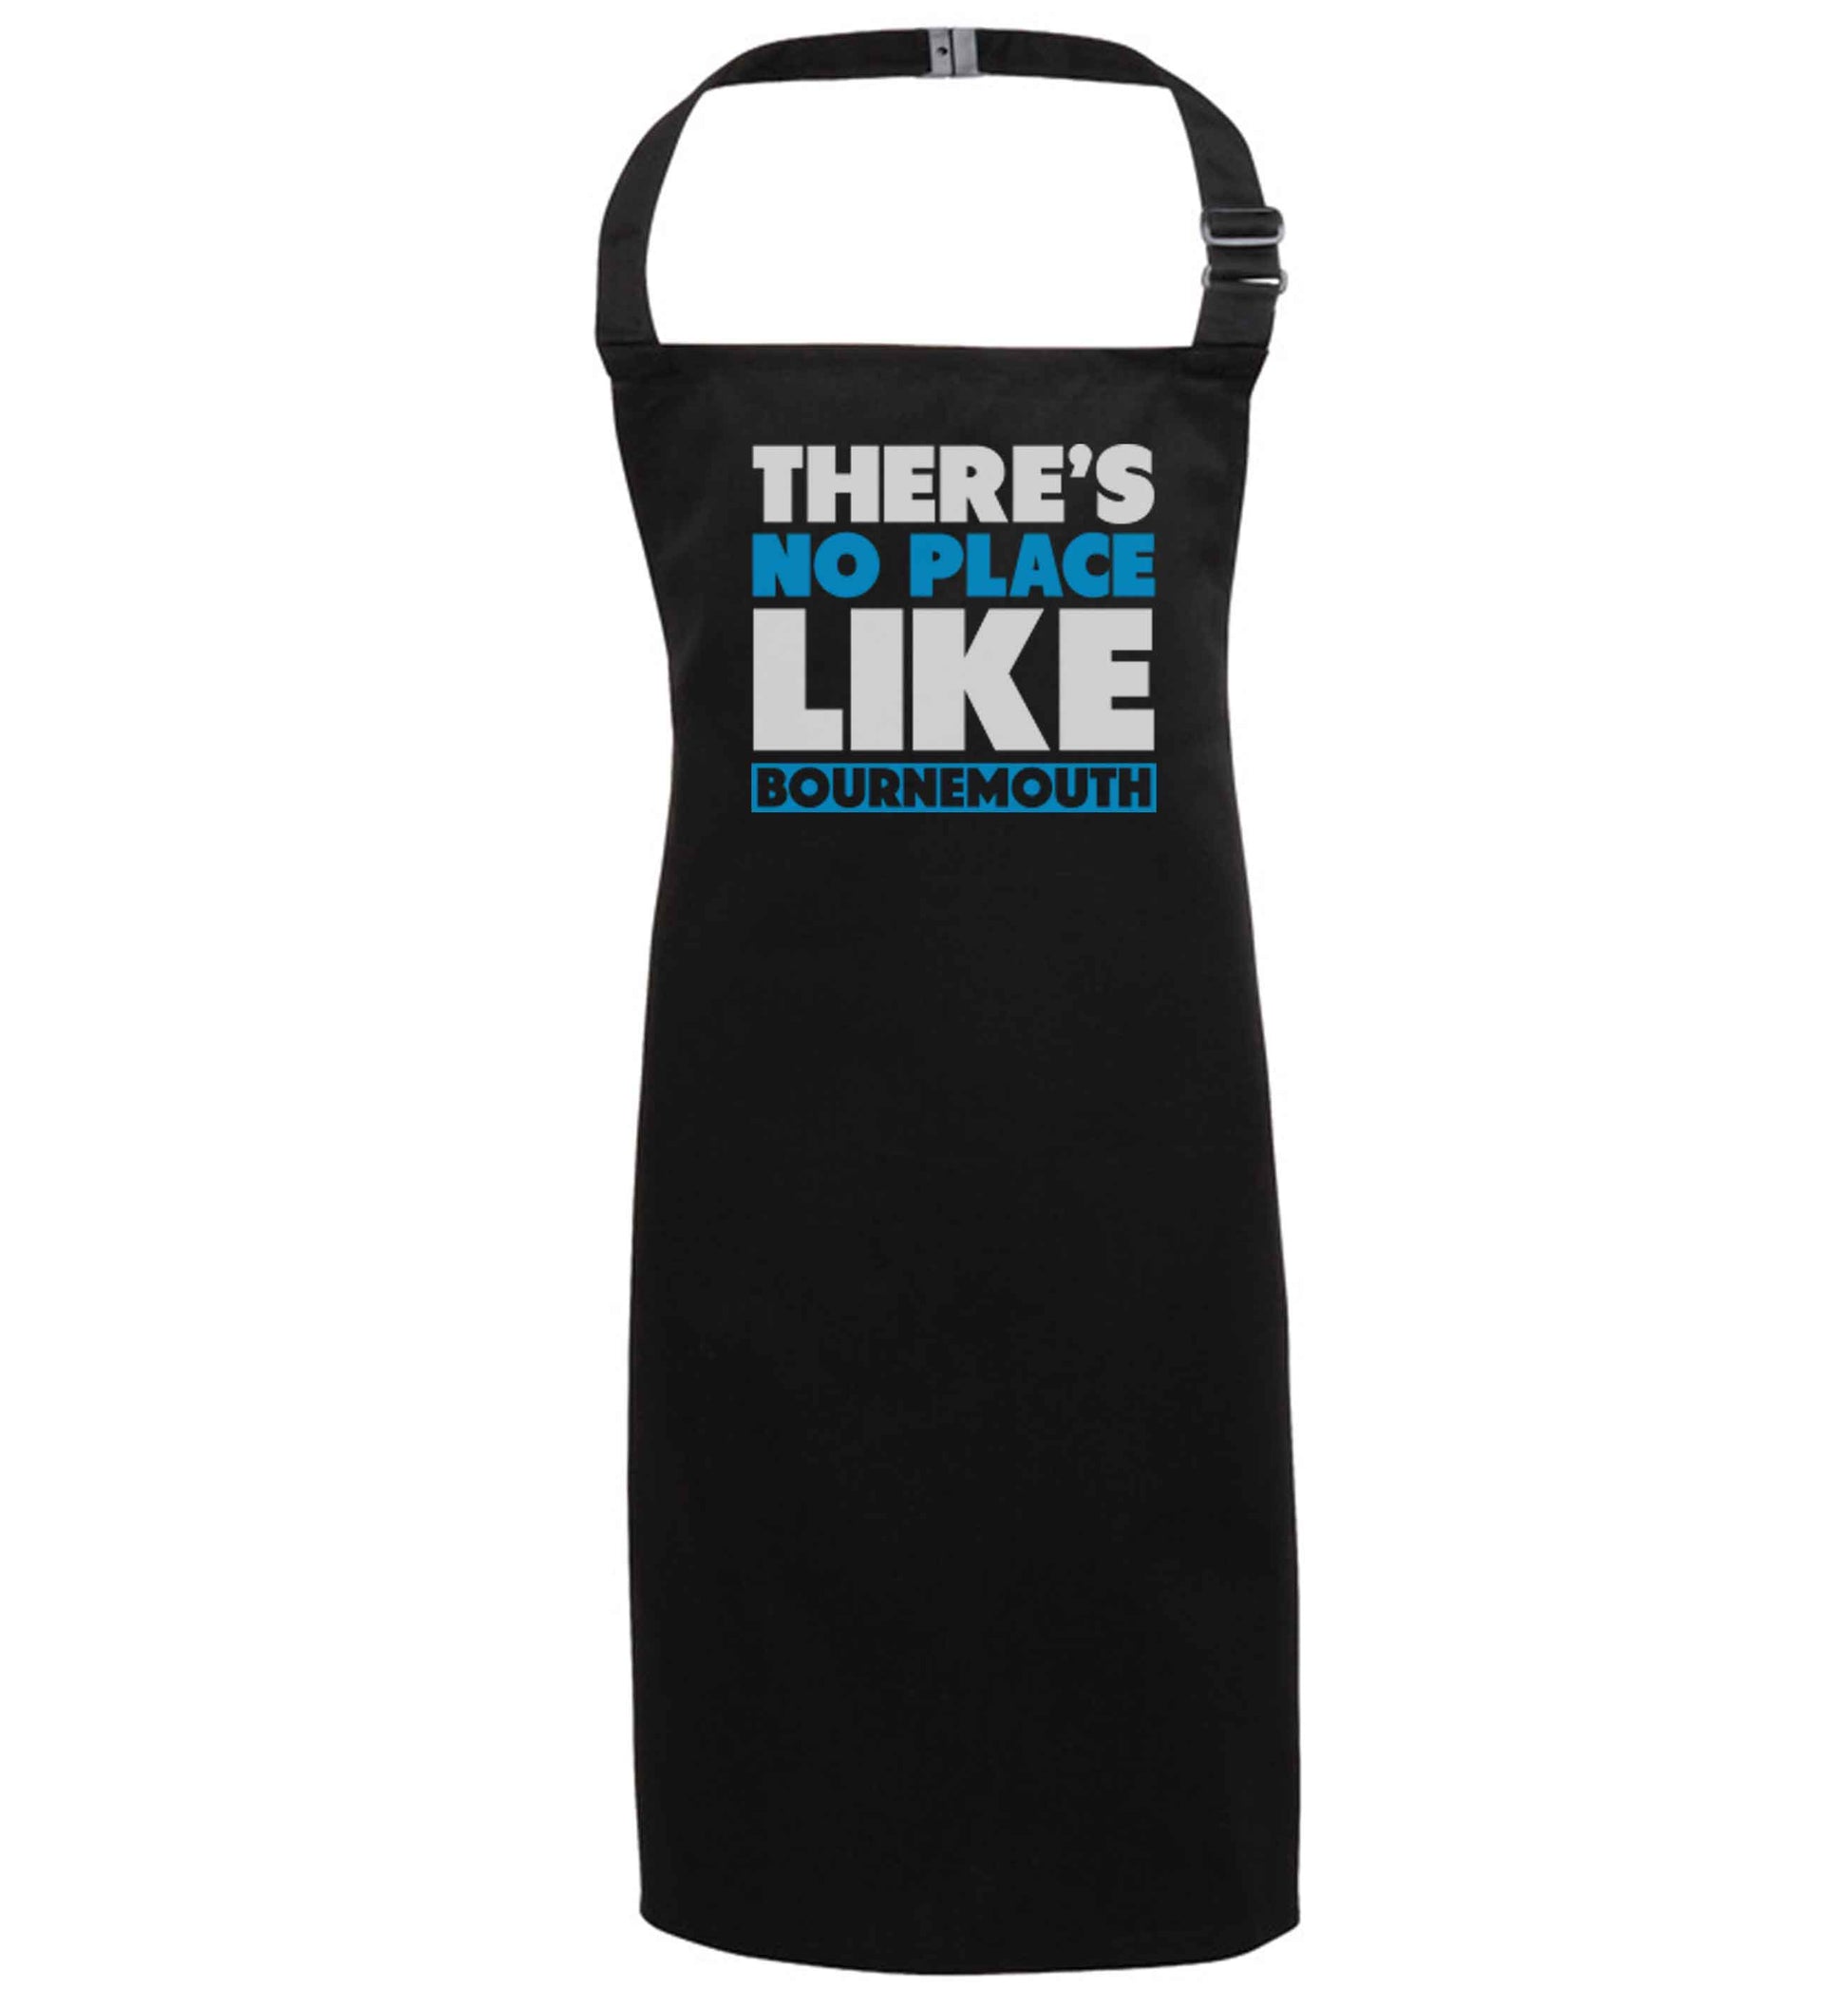 There's no place like Bournemouth black apron 7-10 years